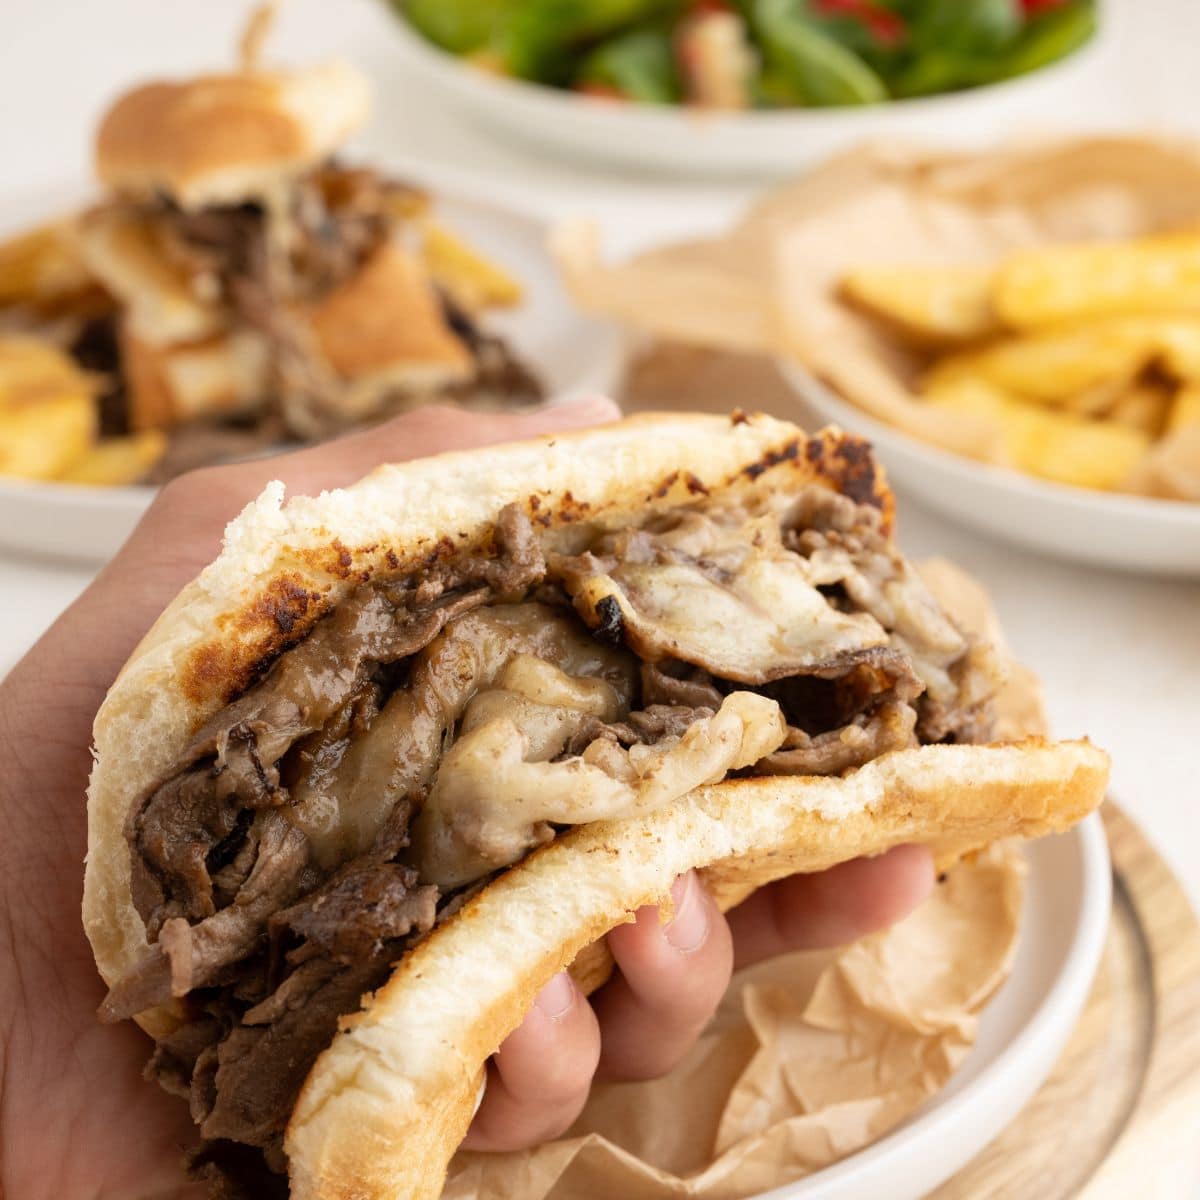 Philly Cheesesteak sandwich held in hand with gooey cheese. Steak and cheese sandwich.